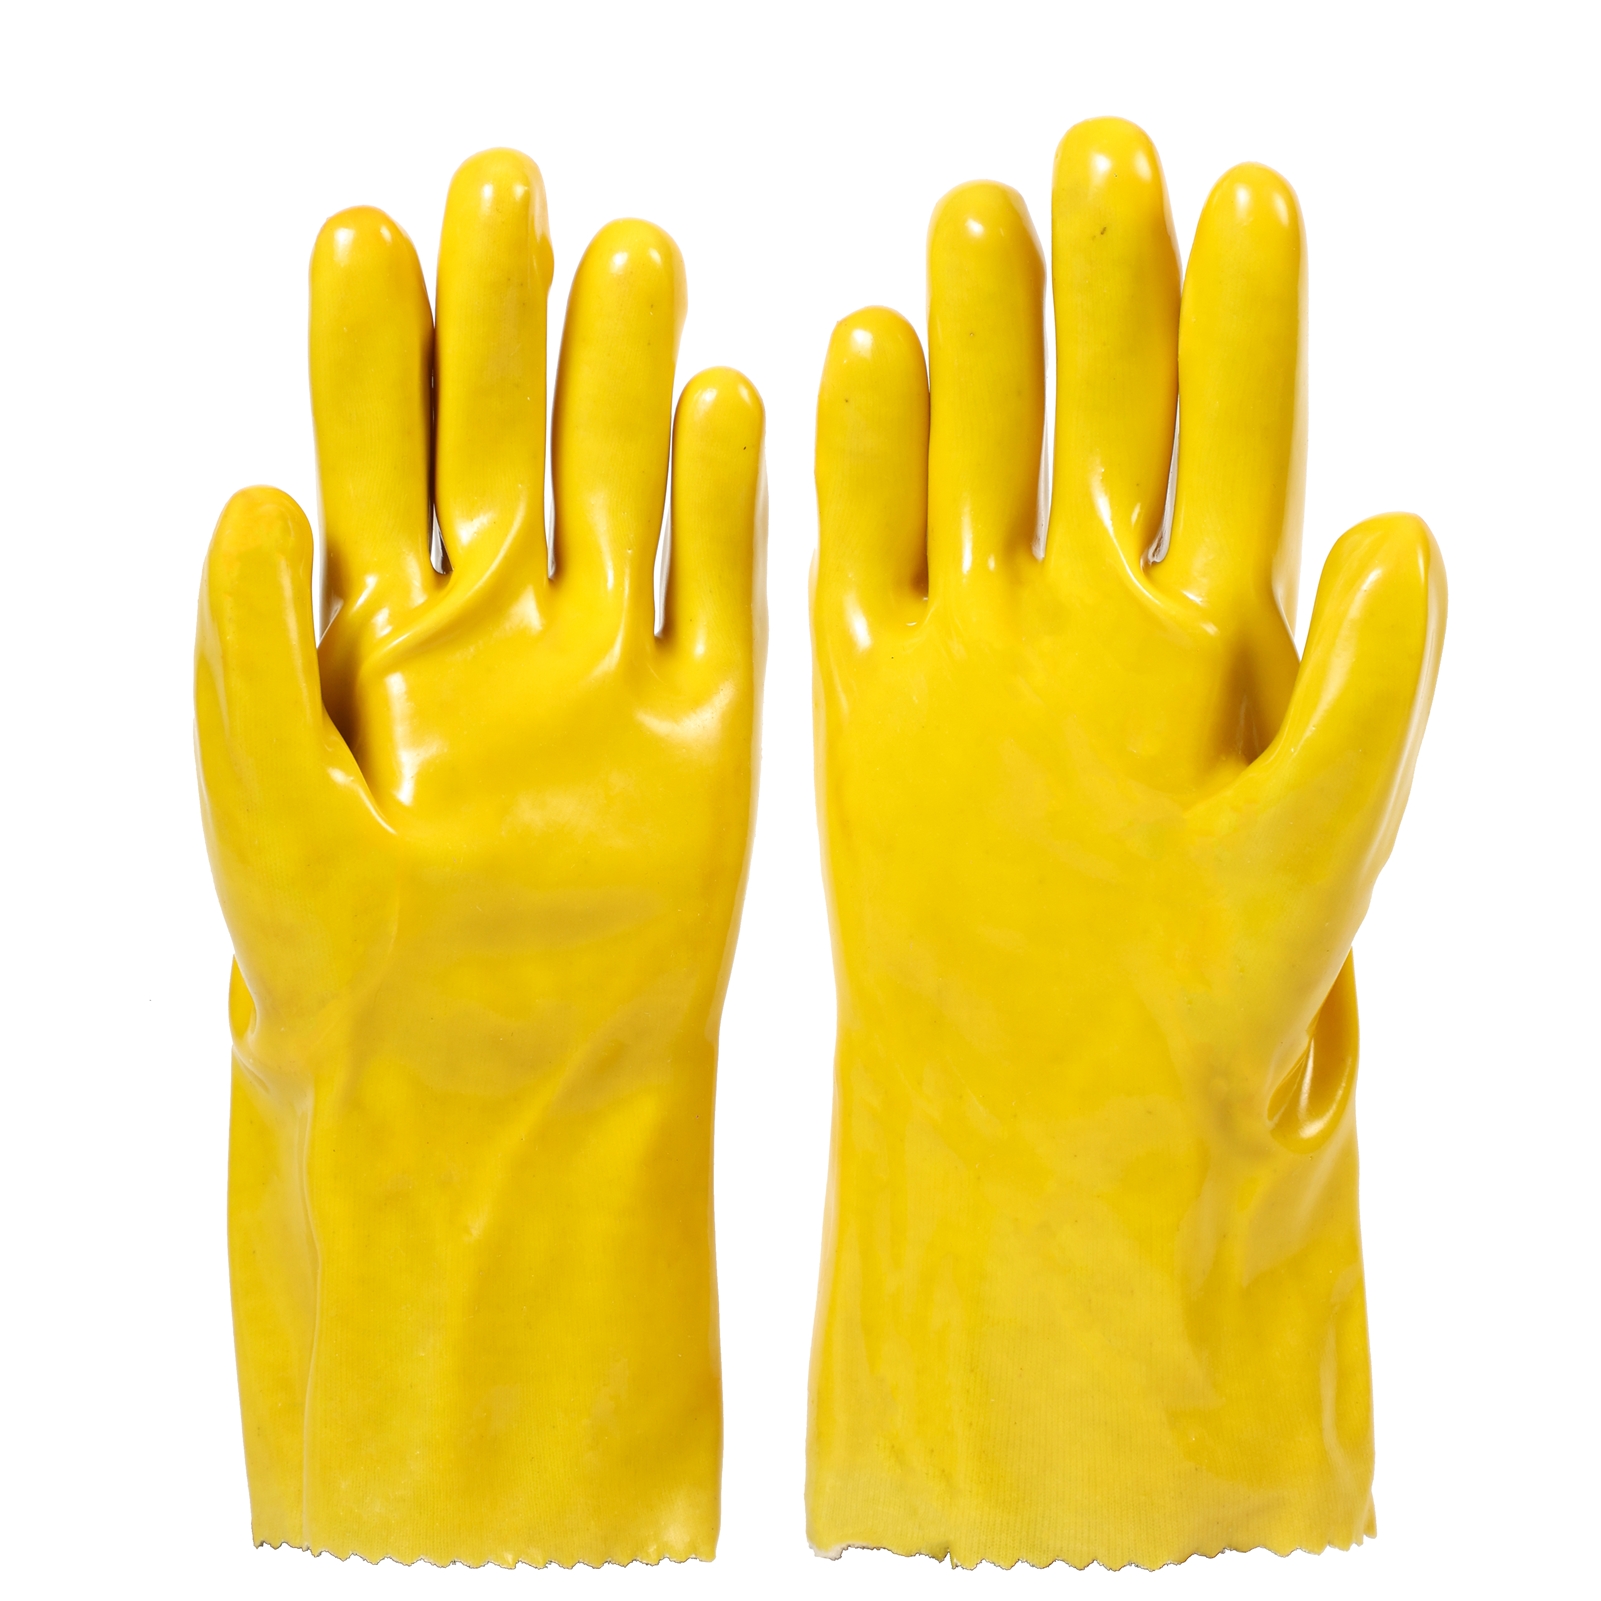 PVC Dipped Gloves, Acid&Oil Resistant, Anti-Toxic&Fouling, Suitable For Contact With Pesticides, Chemical Fertilizers, Toxic Substances